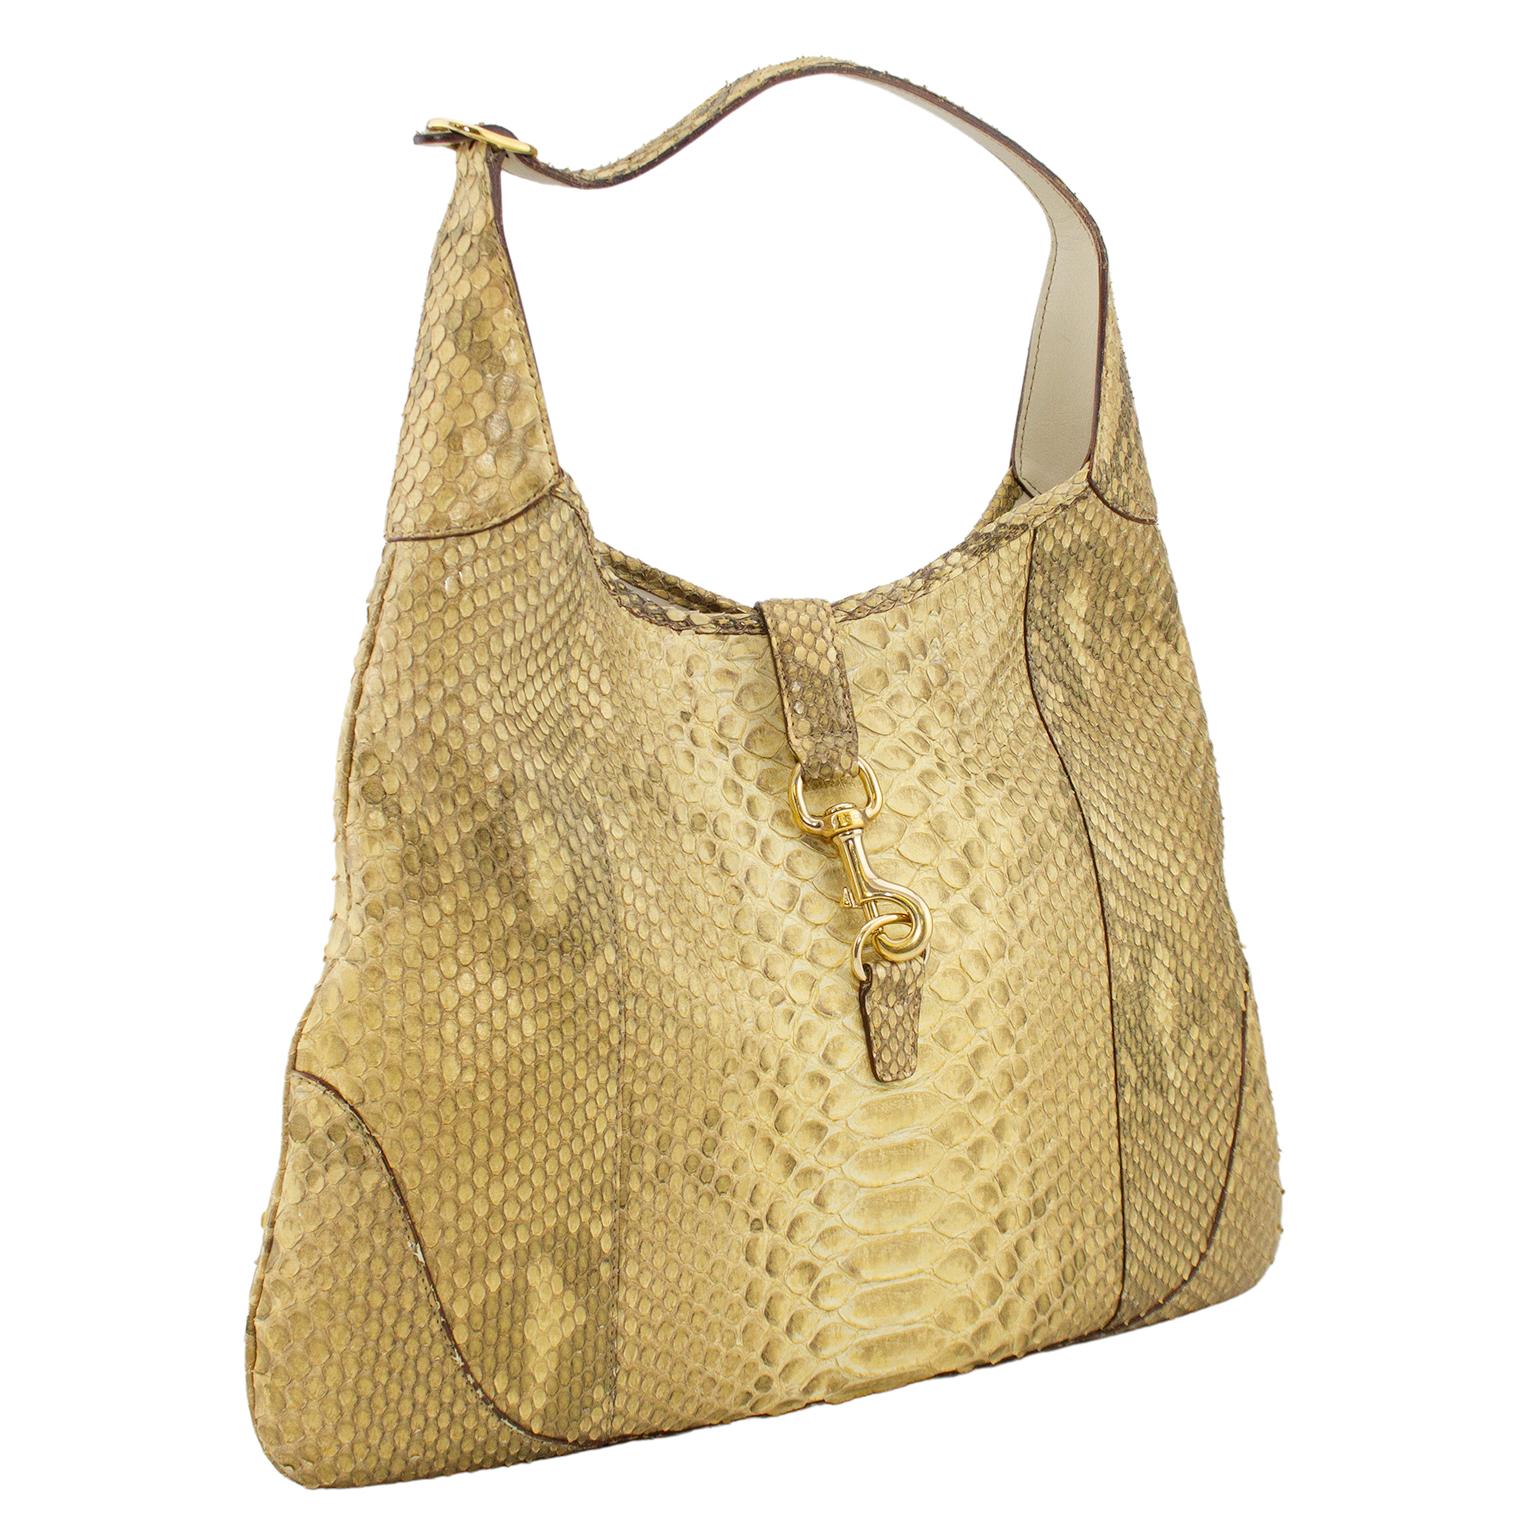 Metallic gold stamped leather Gucci large Jackie O Bouvier Bag with gold-tone hardware, flat shoulder strap, tan and cream canvas lining, dual pockets at interior walls; one with zip closure and one small and narrow for a lipstick. A classic and